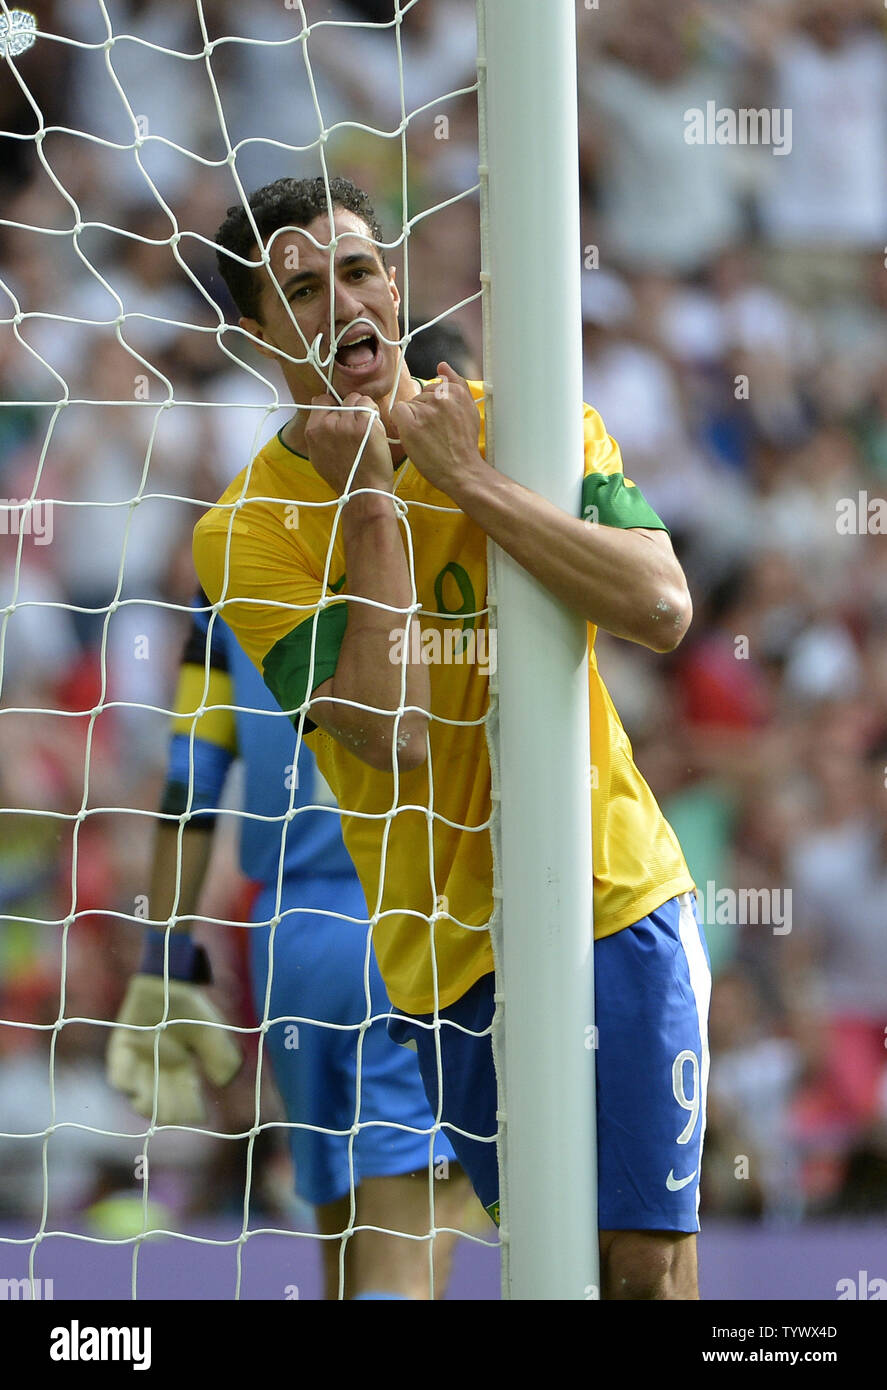 Forward Leandro Damiao of Brazil reacts after Brazil missed a shot on goal during the second half of the Gold Medal Football Match against Mexico at the London 2012 Summer Olympics on August 11, 2012 at Wembley Stadium, London. Mexico defeated Brazil 2-1 to win the Gold Medal.      UPI/Brian Kersey Stock Photo